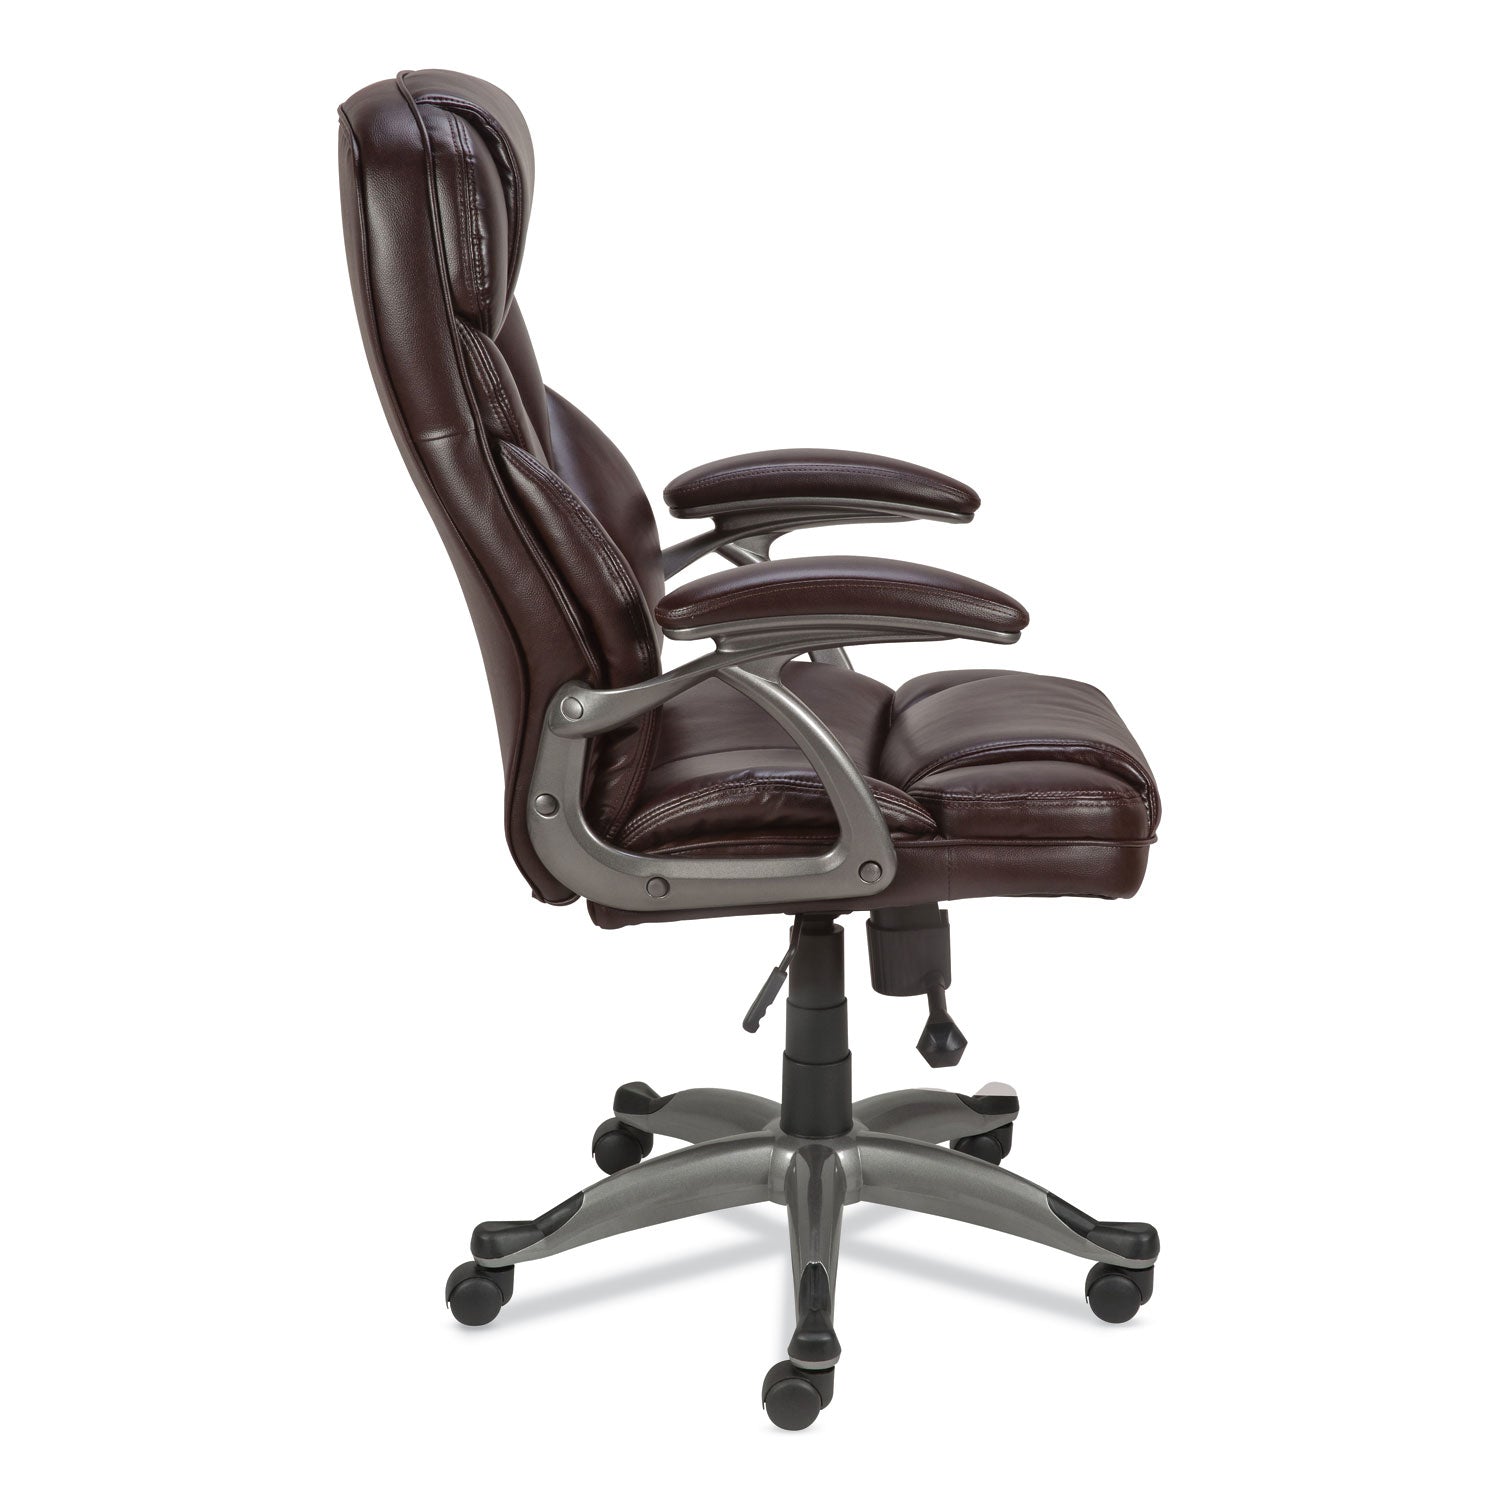 Alera Birns Series High-Back Task Chair, Supports Up to 250 lb, 18.11" to 22.05" Seat Height, Brown Seat/Back, Chrome Base - 4